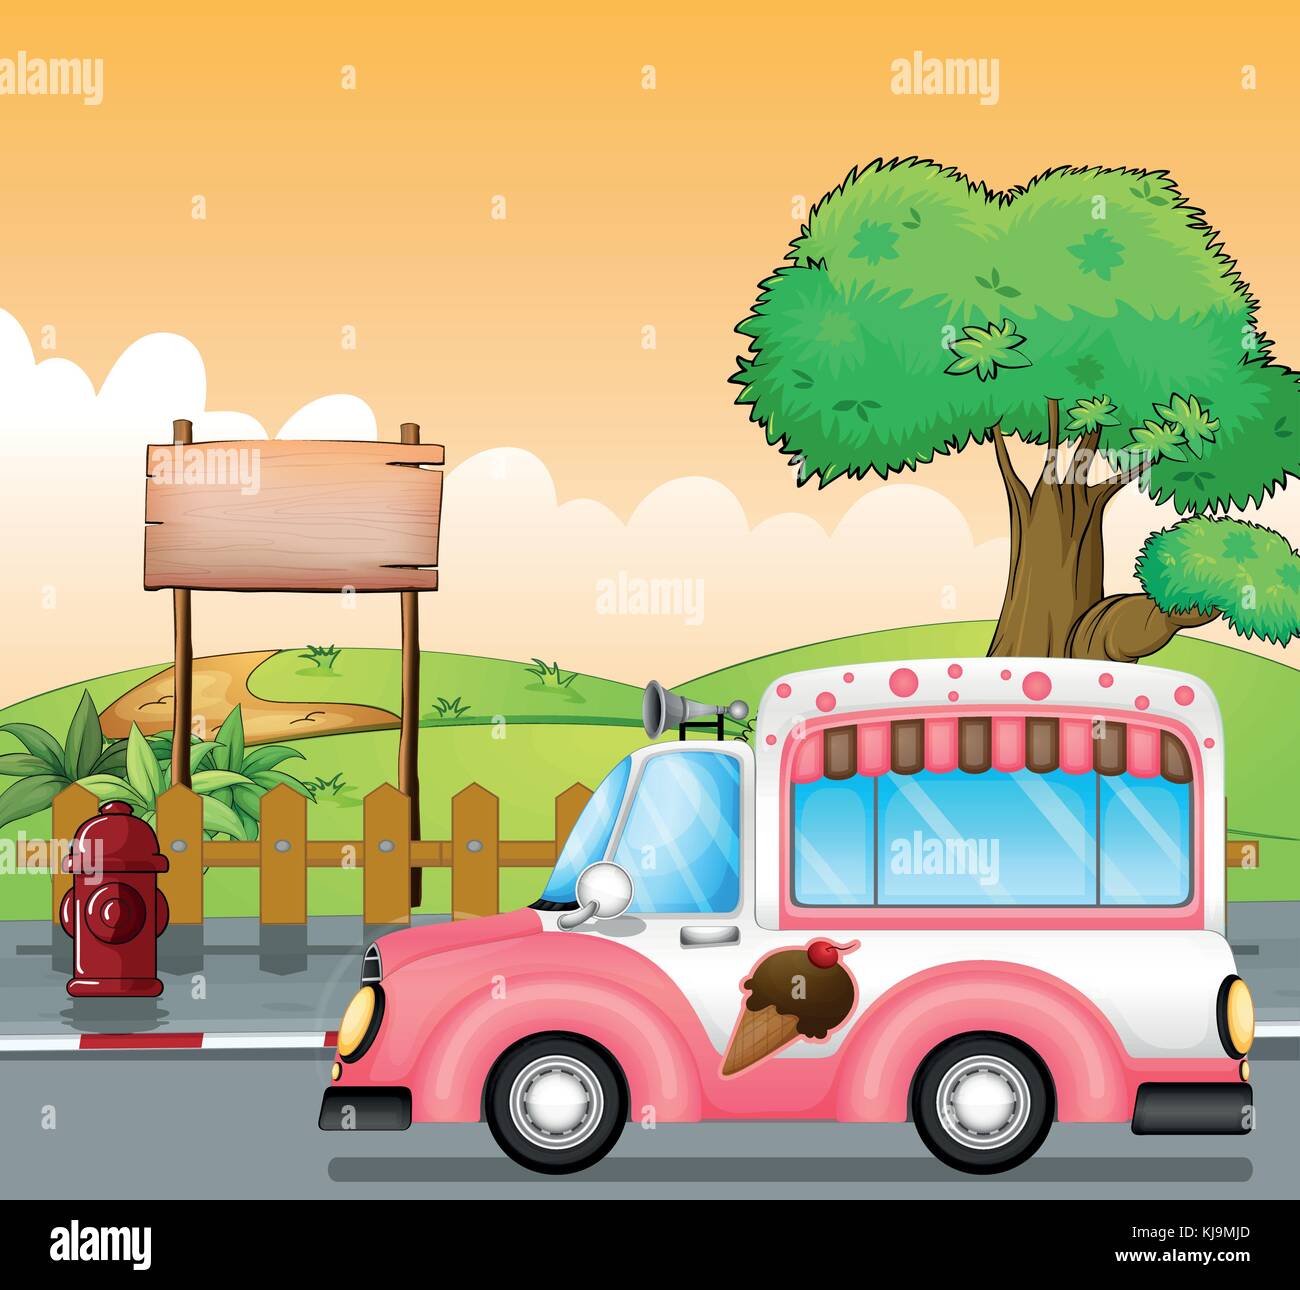 Illustration of a pink ice cream bus and an empty board Stock Vector